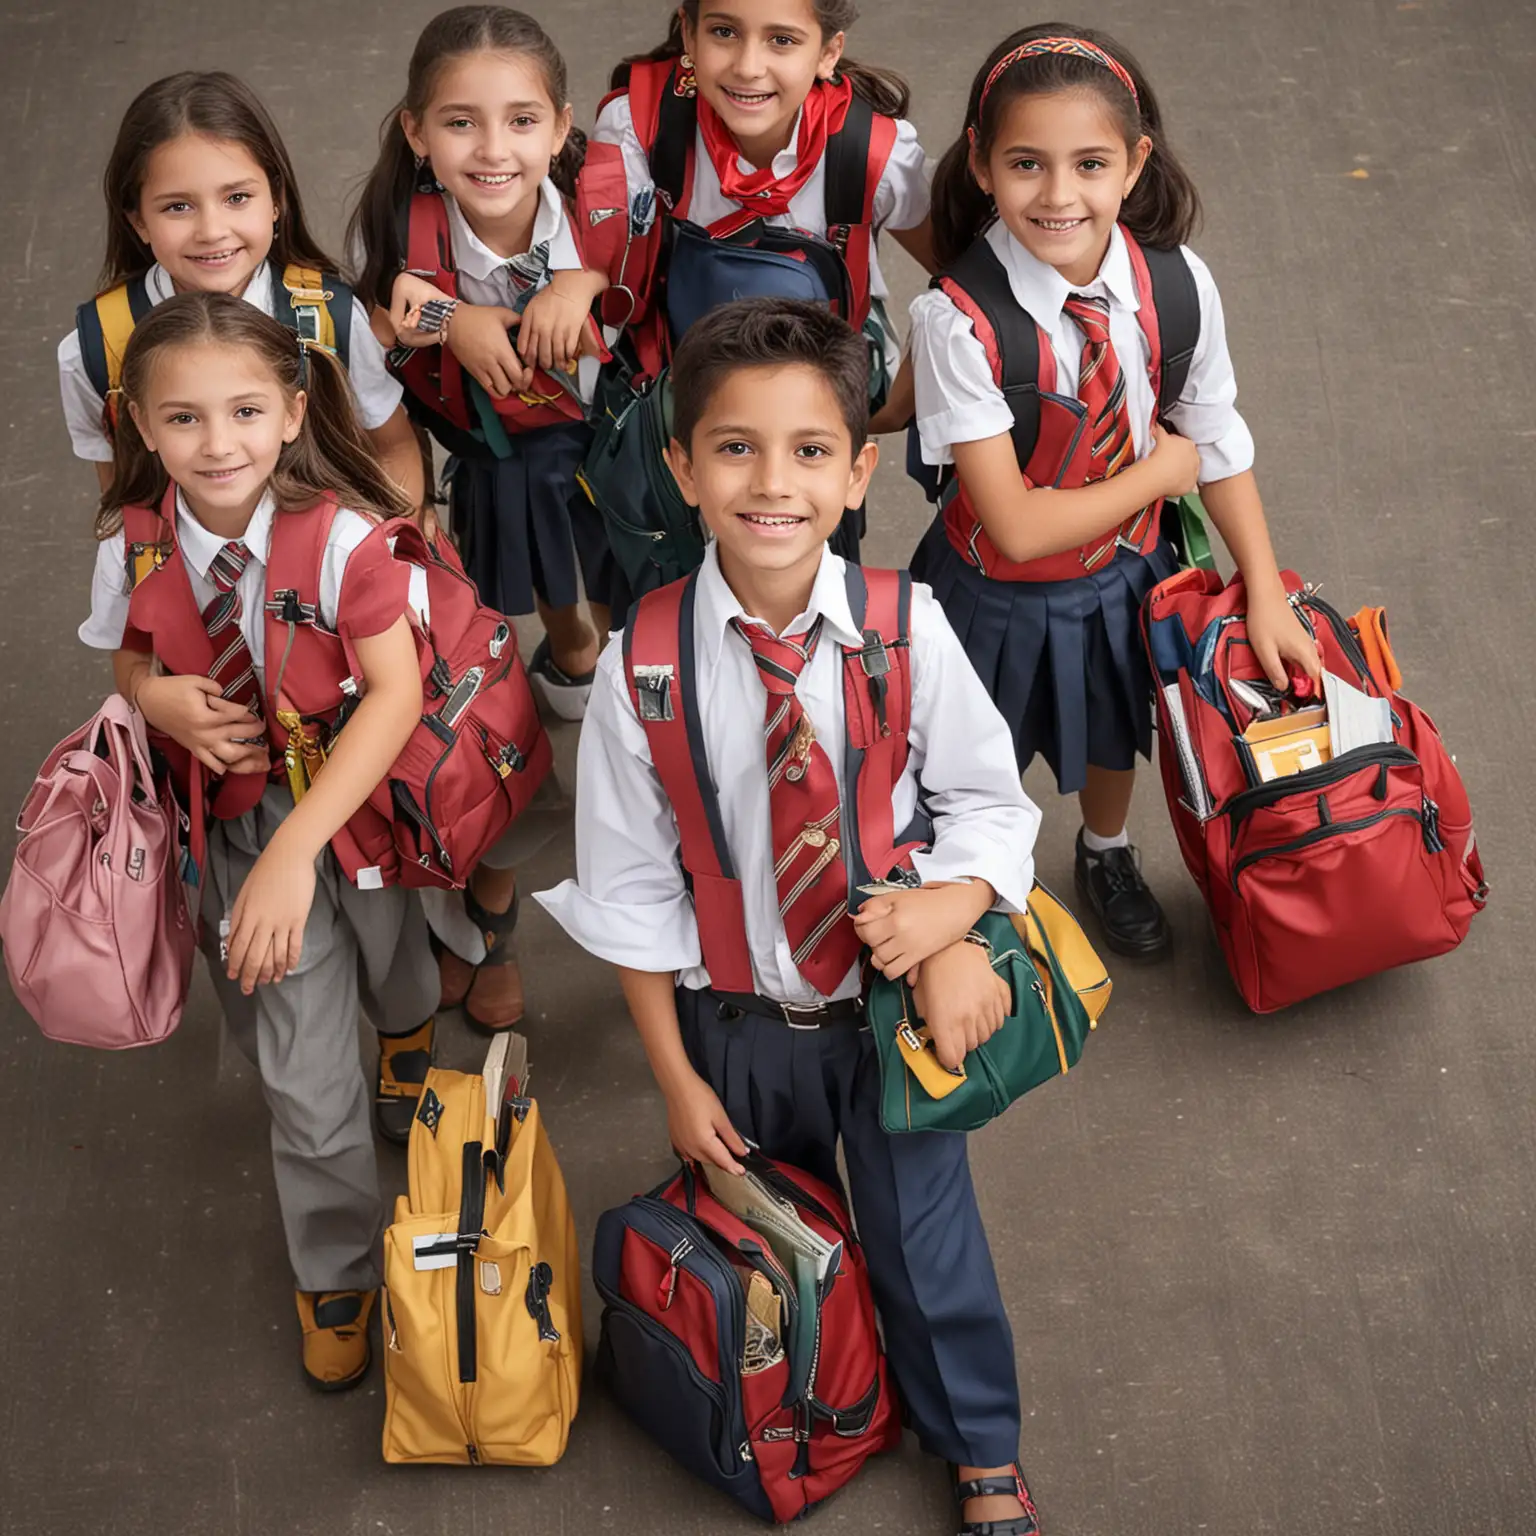 Generate an image where there should be a school children of age between 5 to 12 years with different types of customised accesories like bags, ties, school belts, files and all these people are happy and joyfull